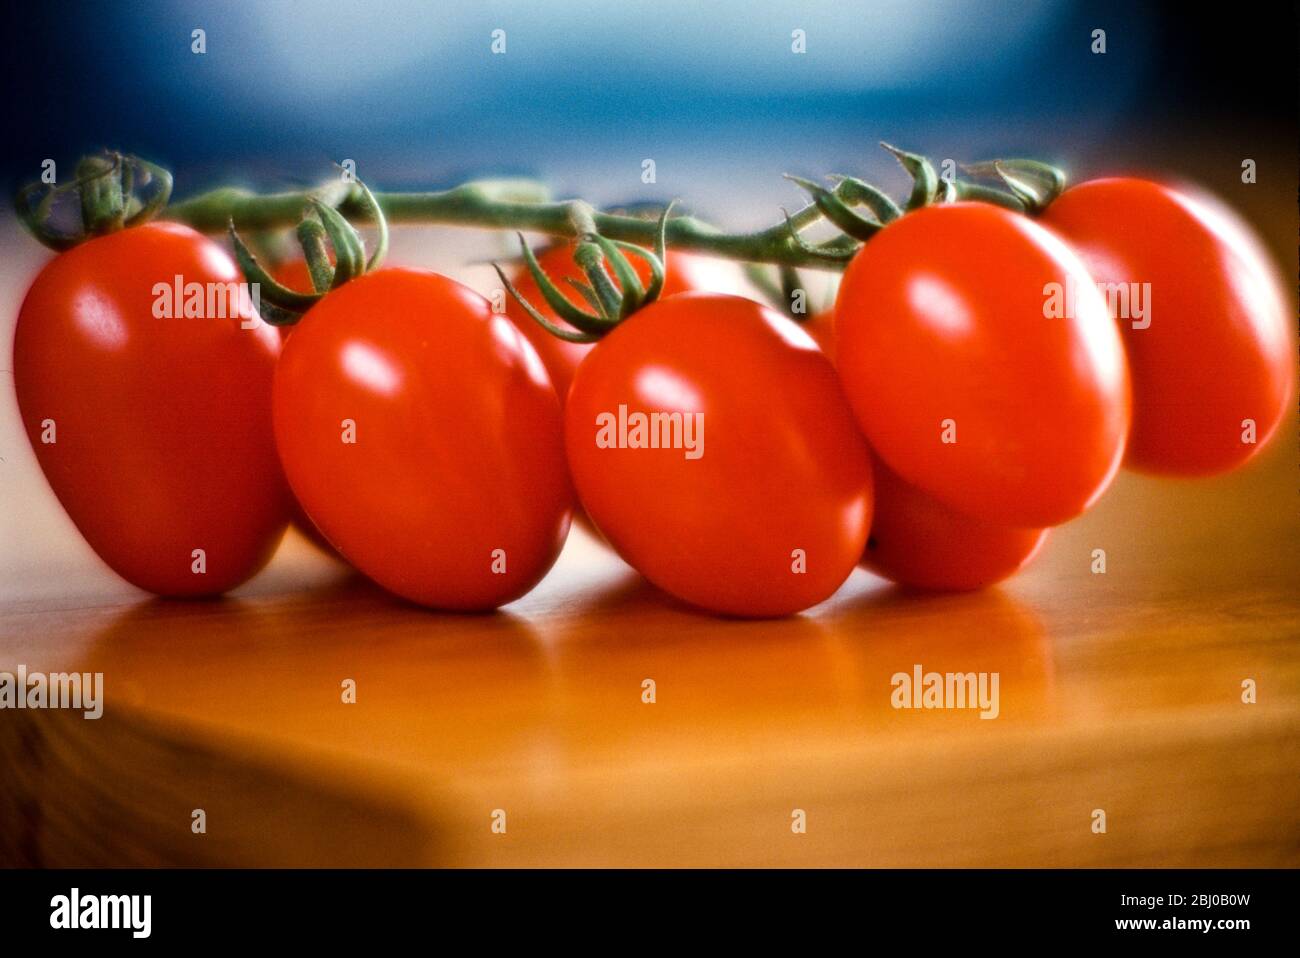 Cluster of shiny red plum tomatoes on the vine on wooden table surface - Stock Photo